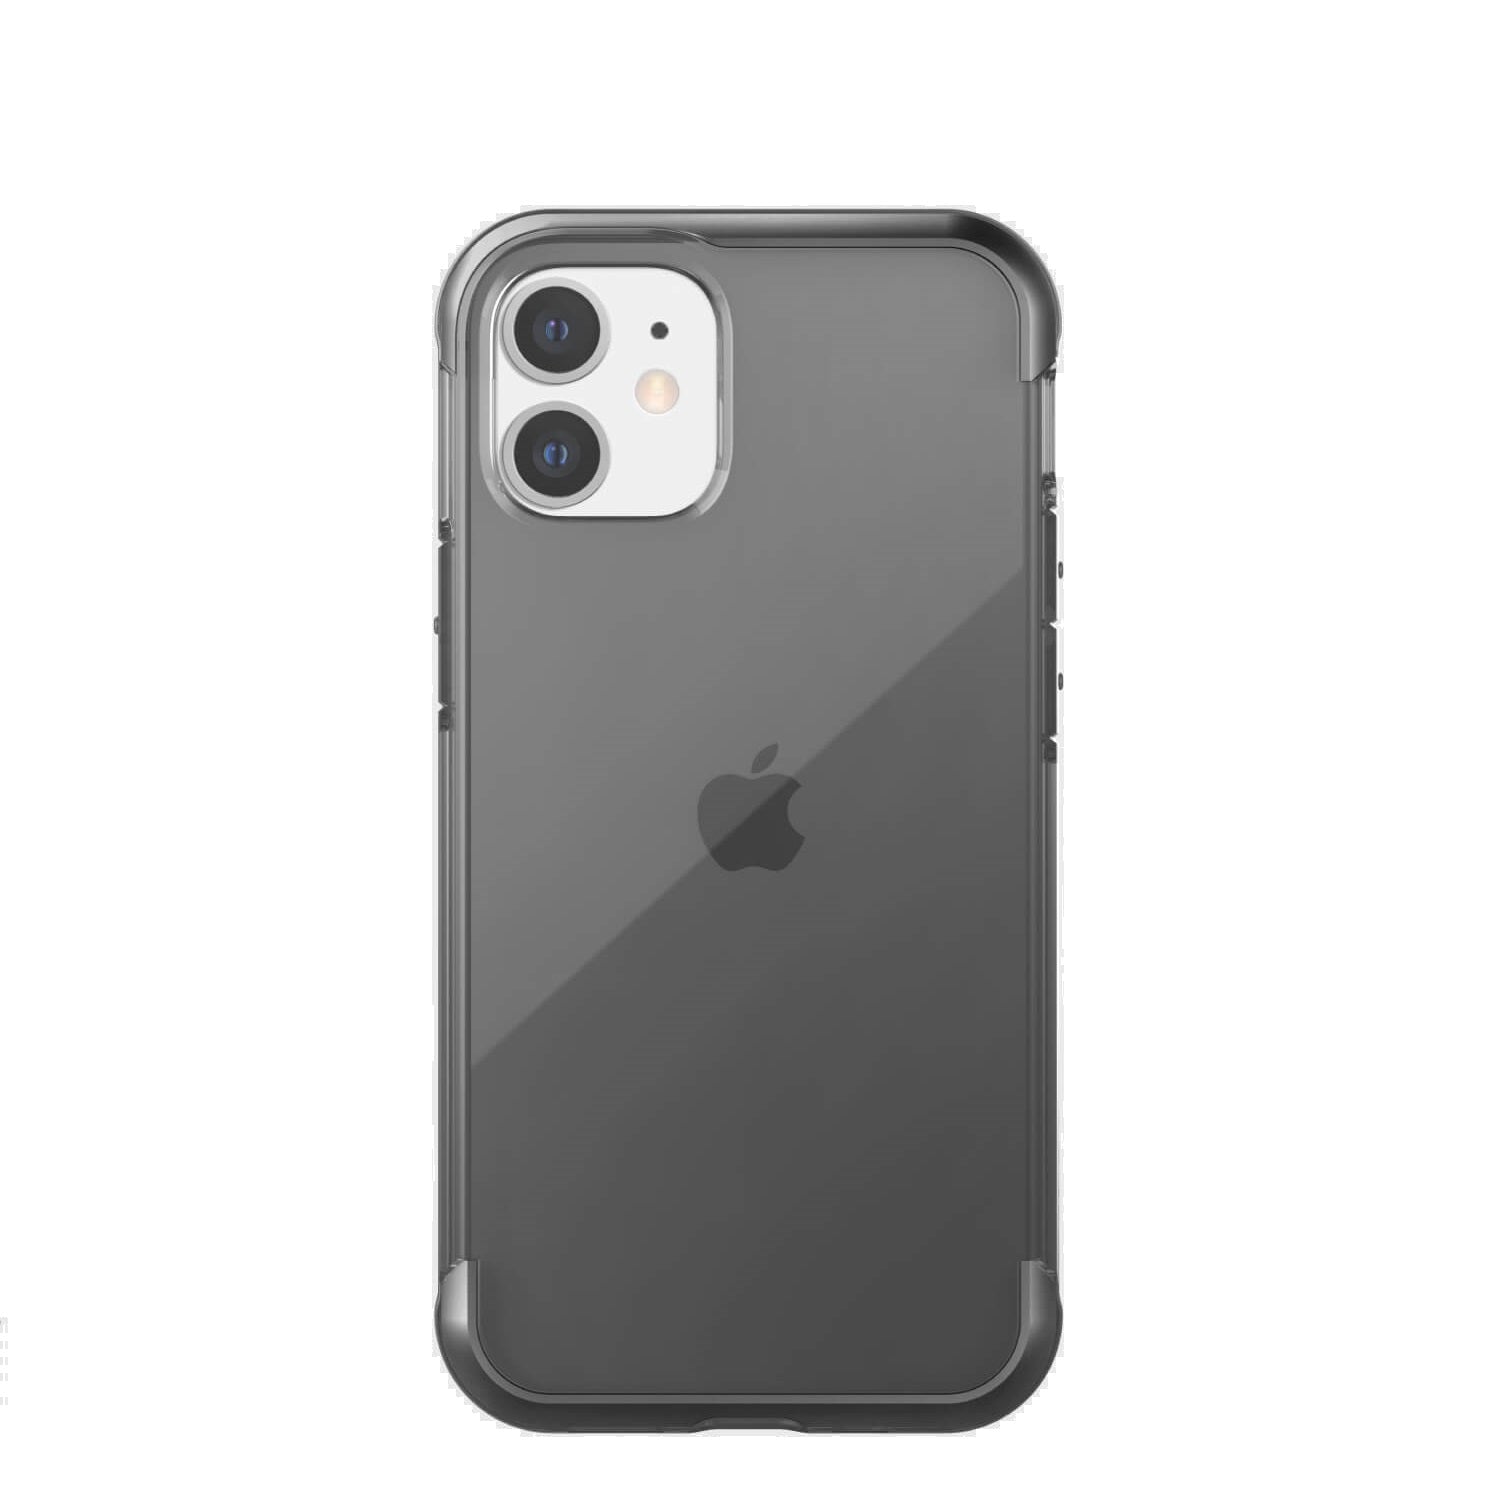 https://caserace.net/products/x-doria-defense-air-back-cover-for-iphone-12-mini-5-4-clear